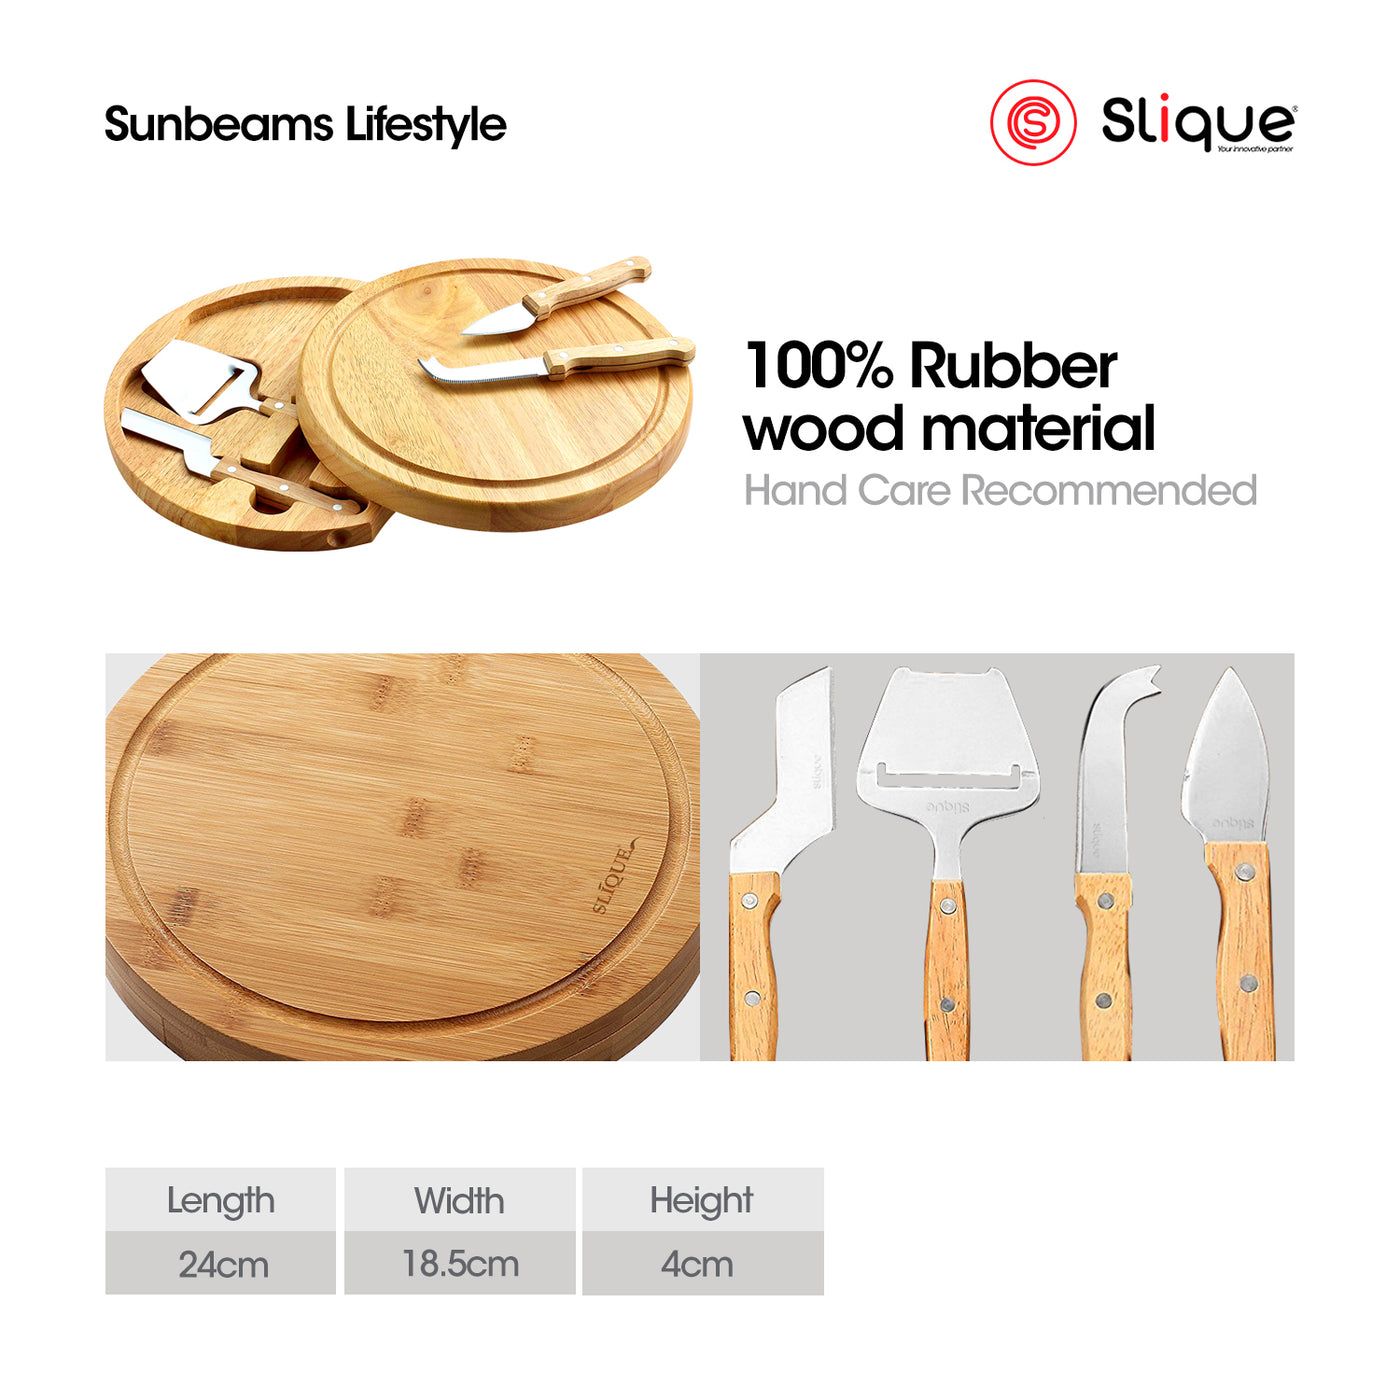 SLIQUE Premium Bamboo Cheese Board and Stainless Steel Cutlery Set of 5